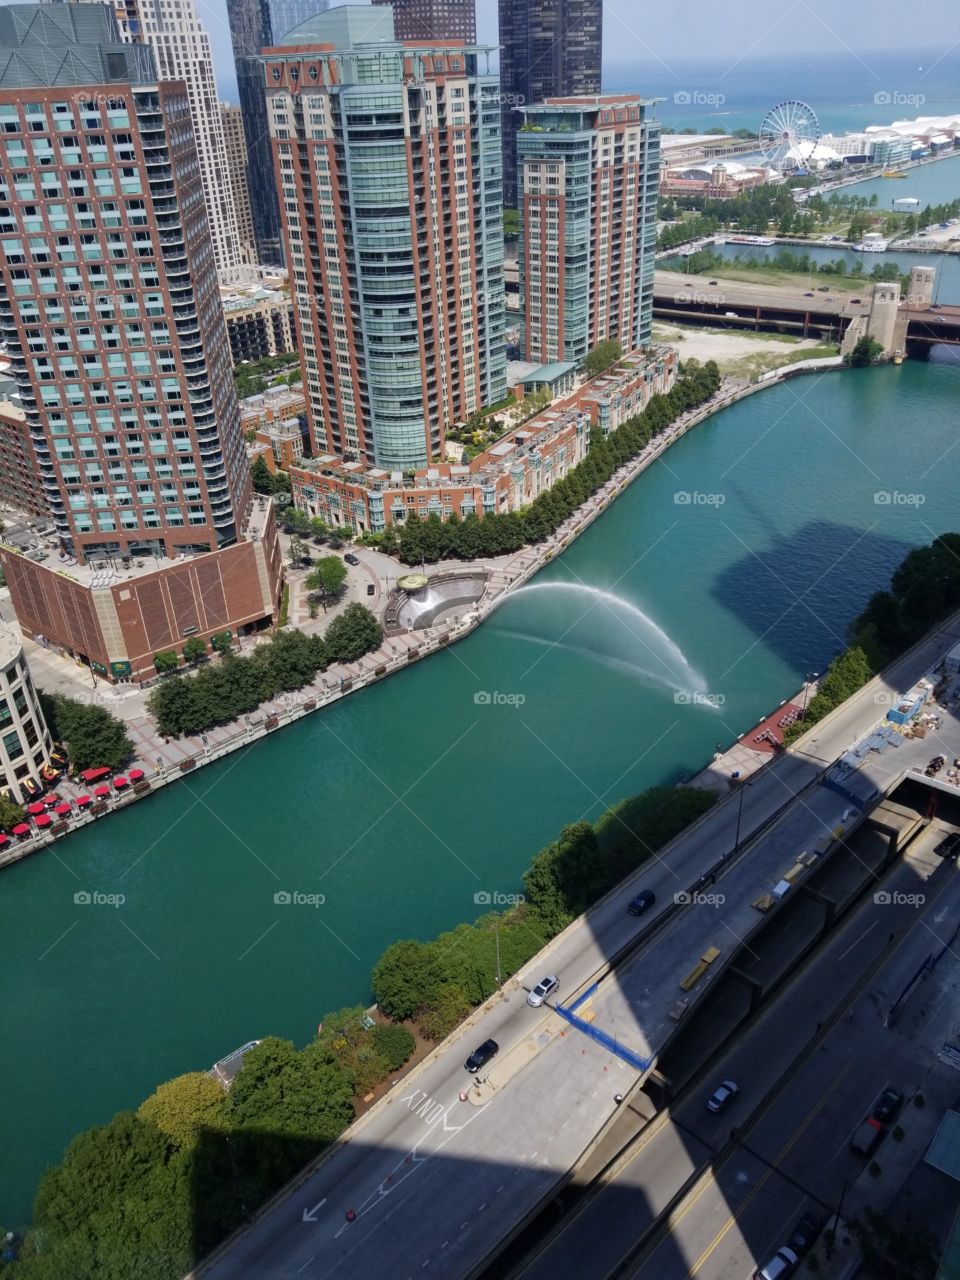 Downtown Chicago River and Lakefront